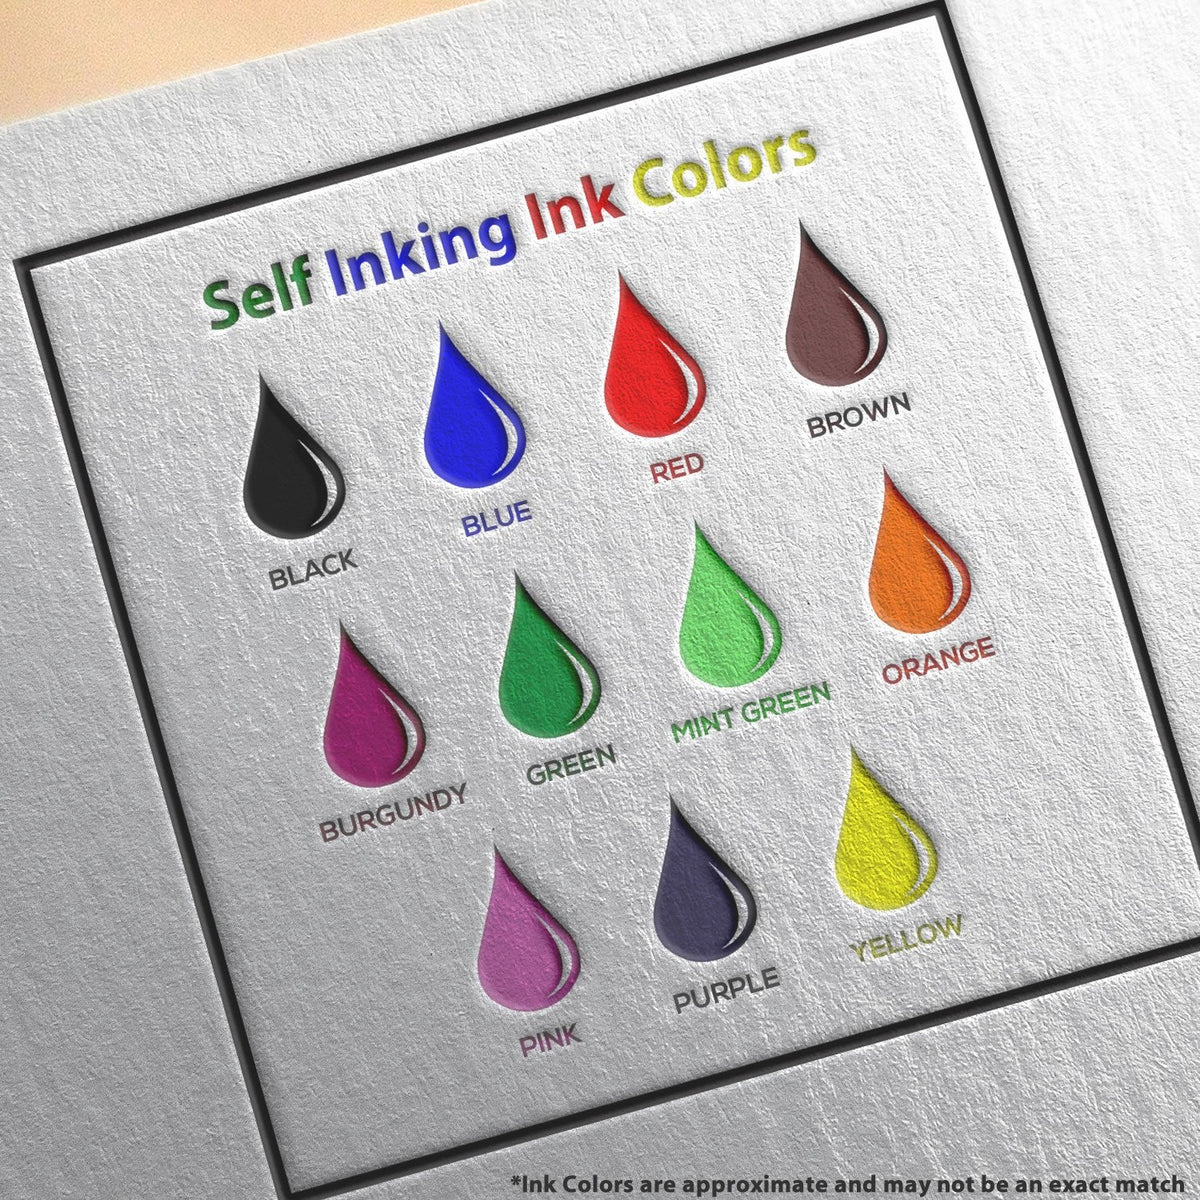 Self Inking Redo In Pencil And Turn Back In Stamp Ink Color Options